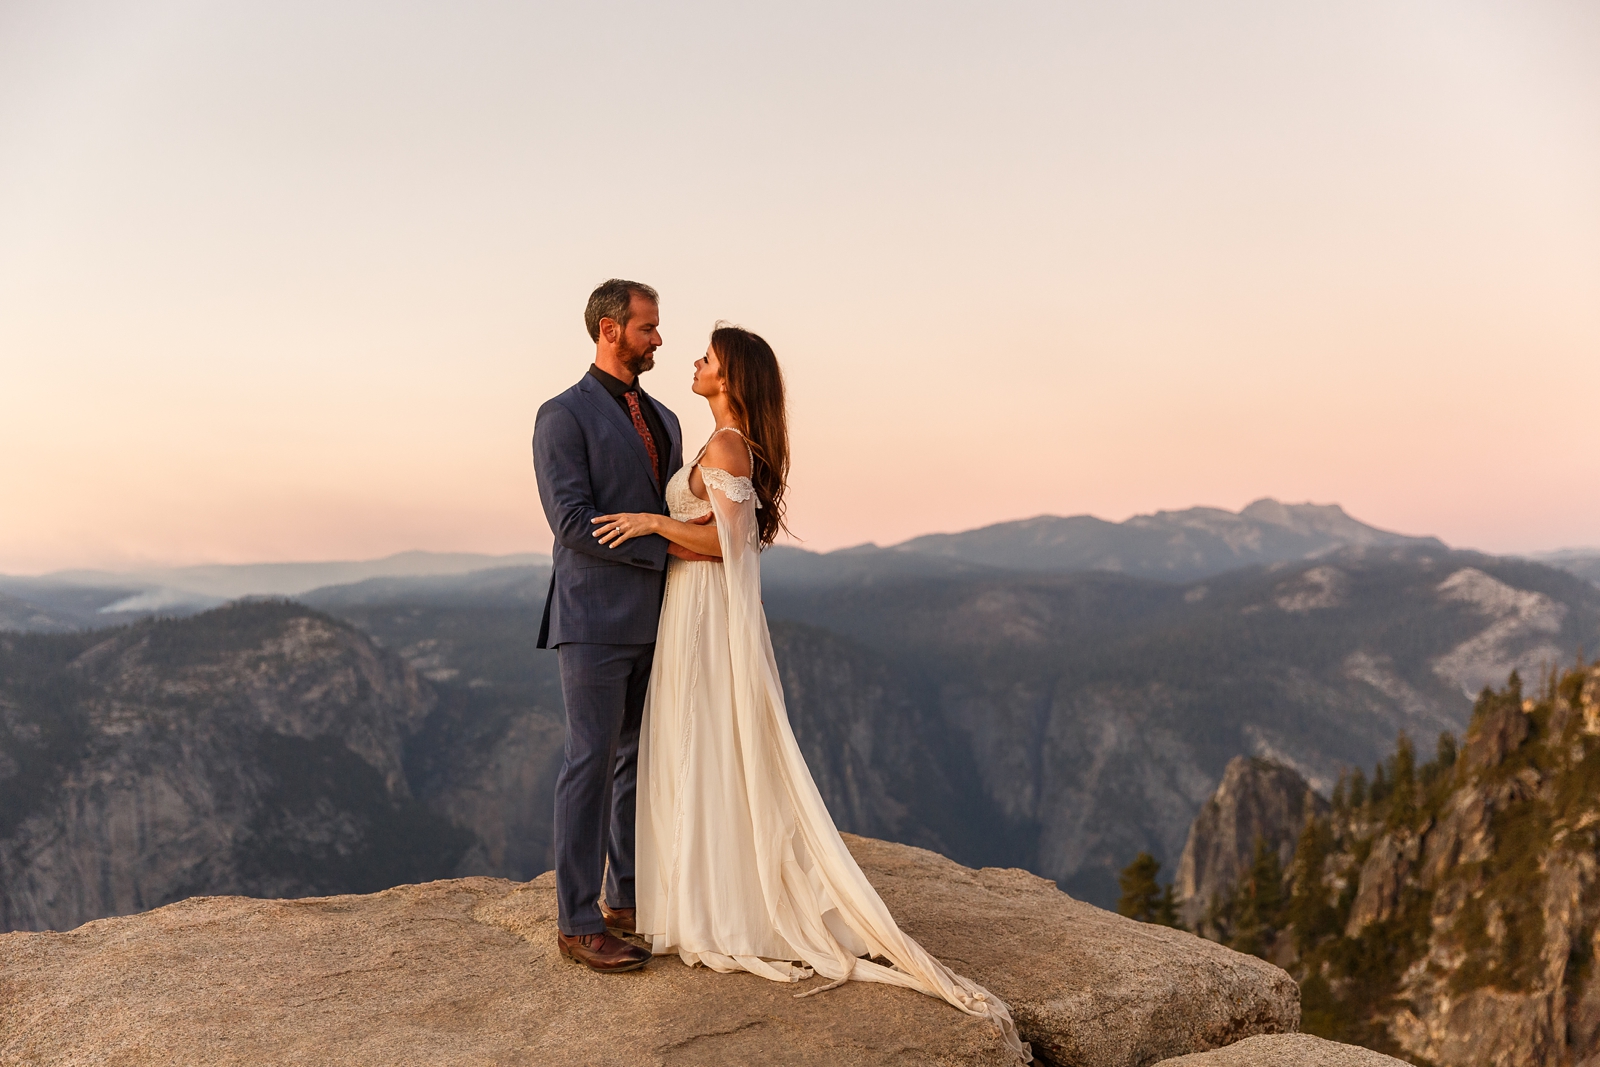 Dreamy moments at this couple's intimate Taft Point elopement.